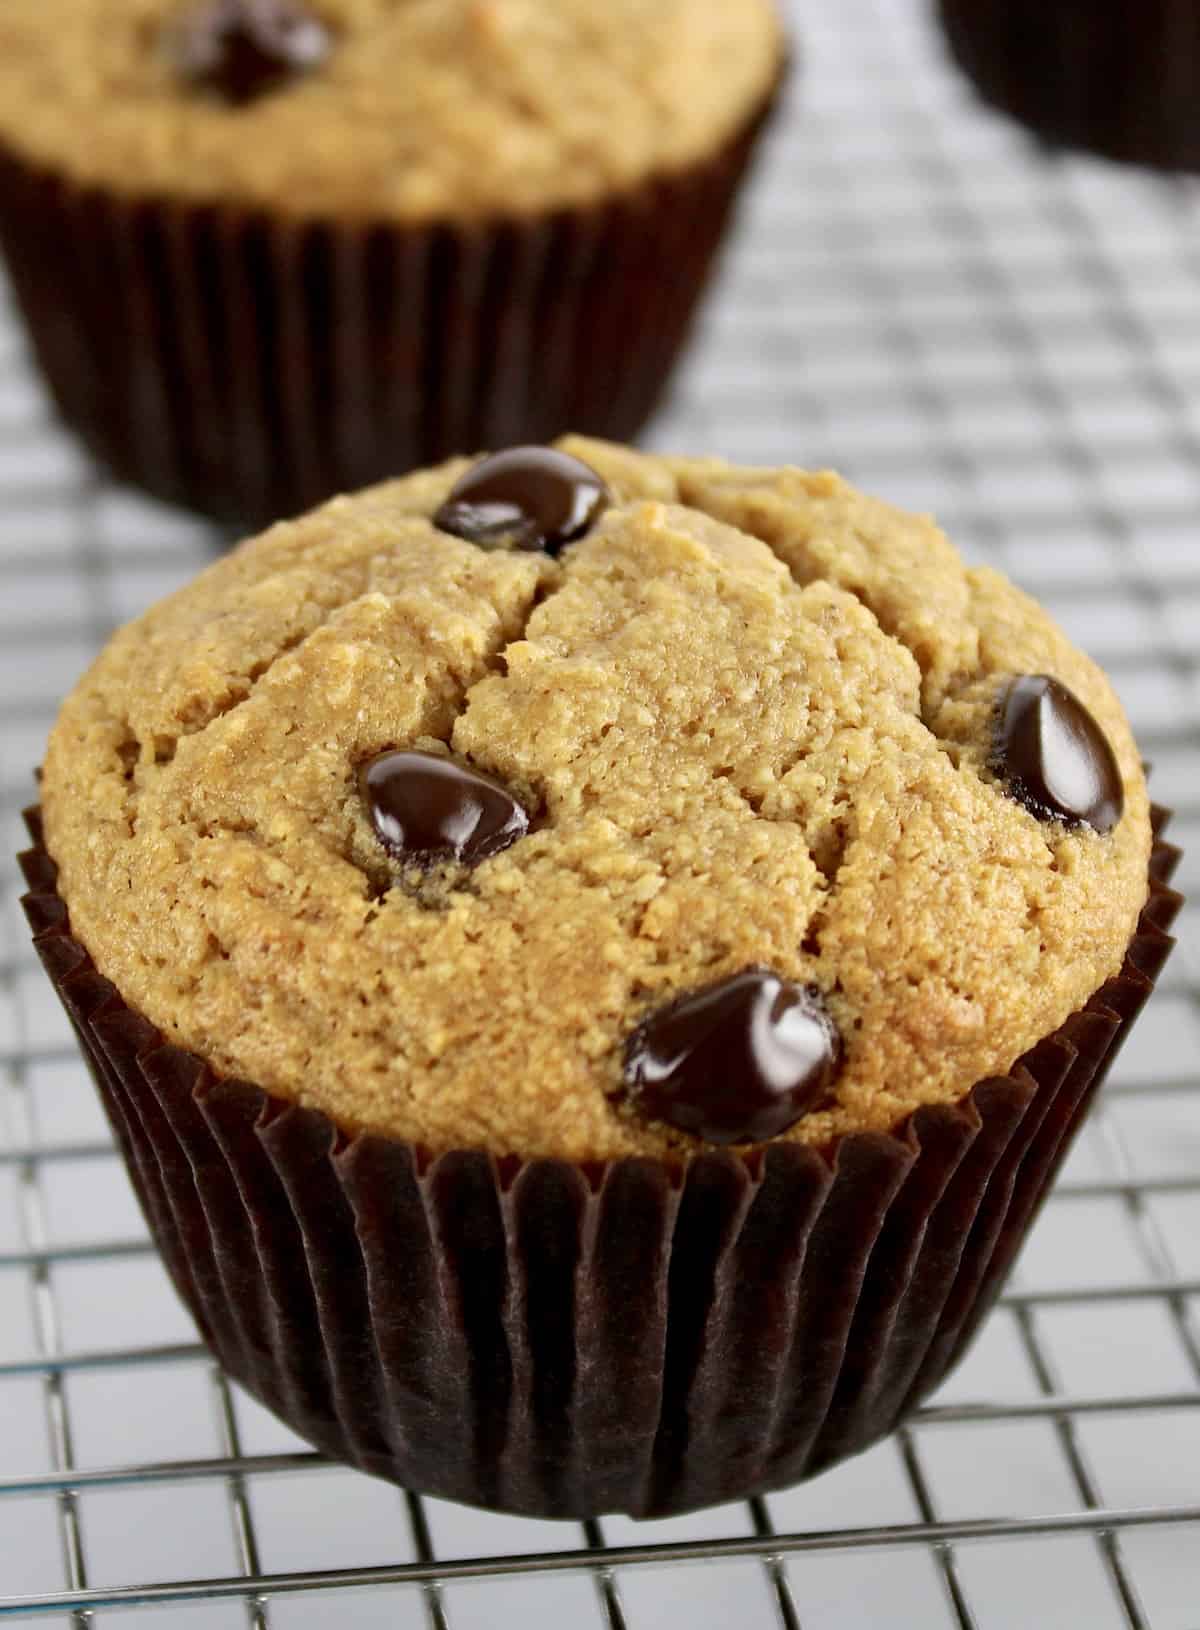 closeup of Gluten Free Banana Chocolate Chip Muffin in brown liner on cooking rack